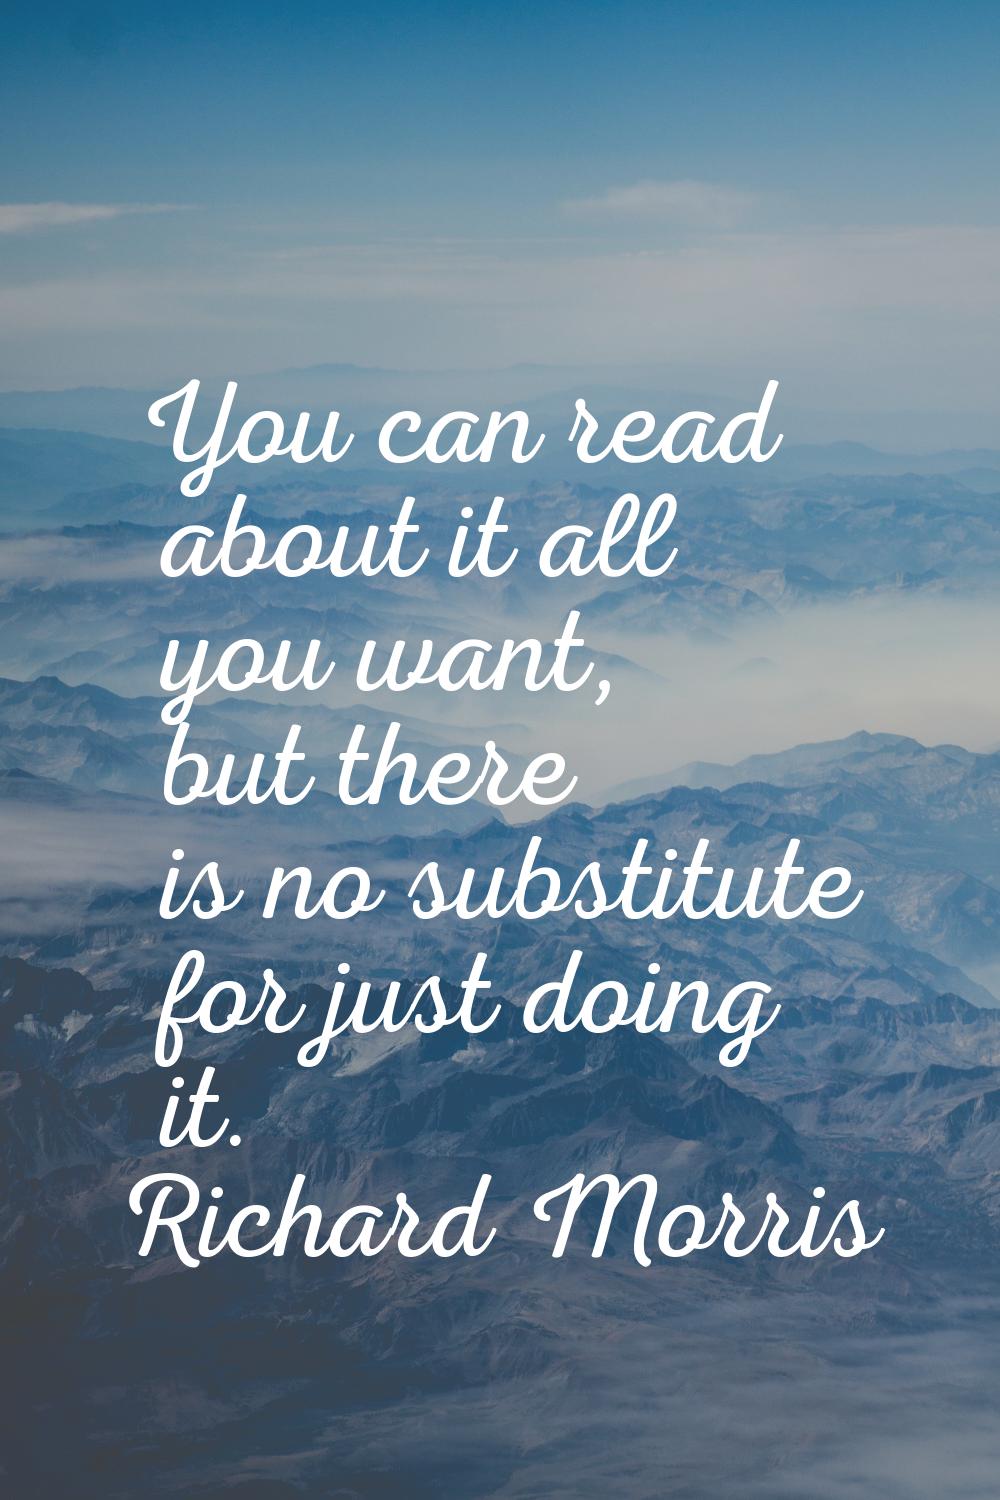 You can read about it all you want, but there is no substitute for just doing it.